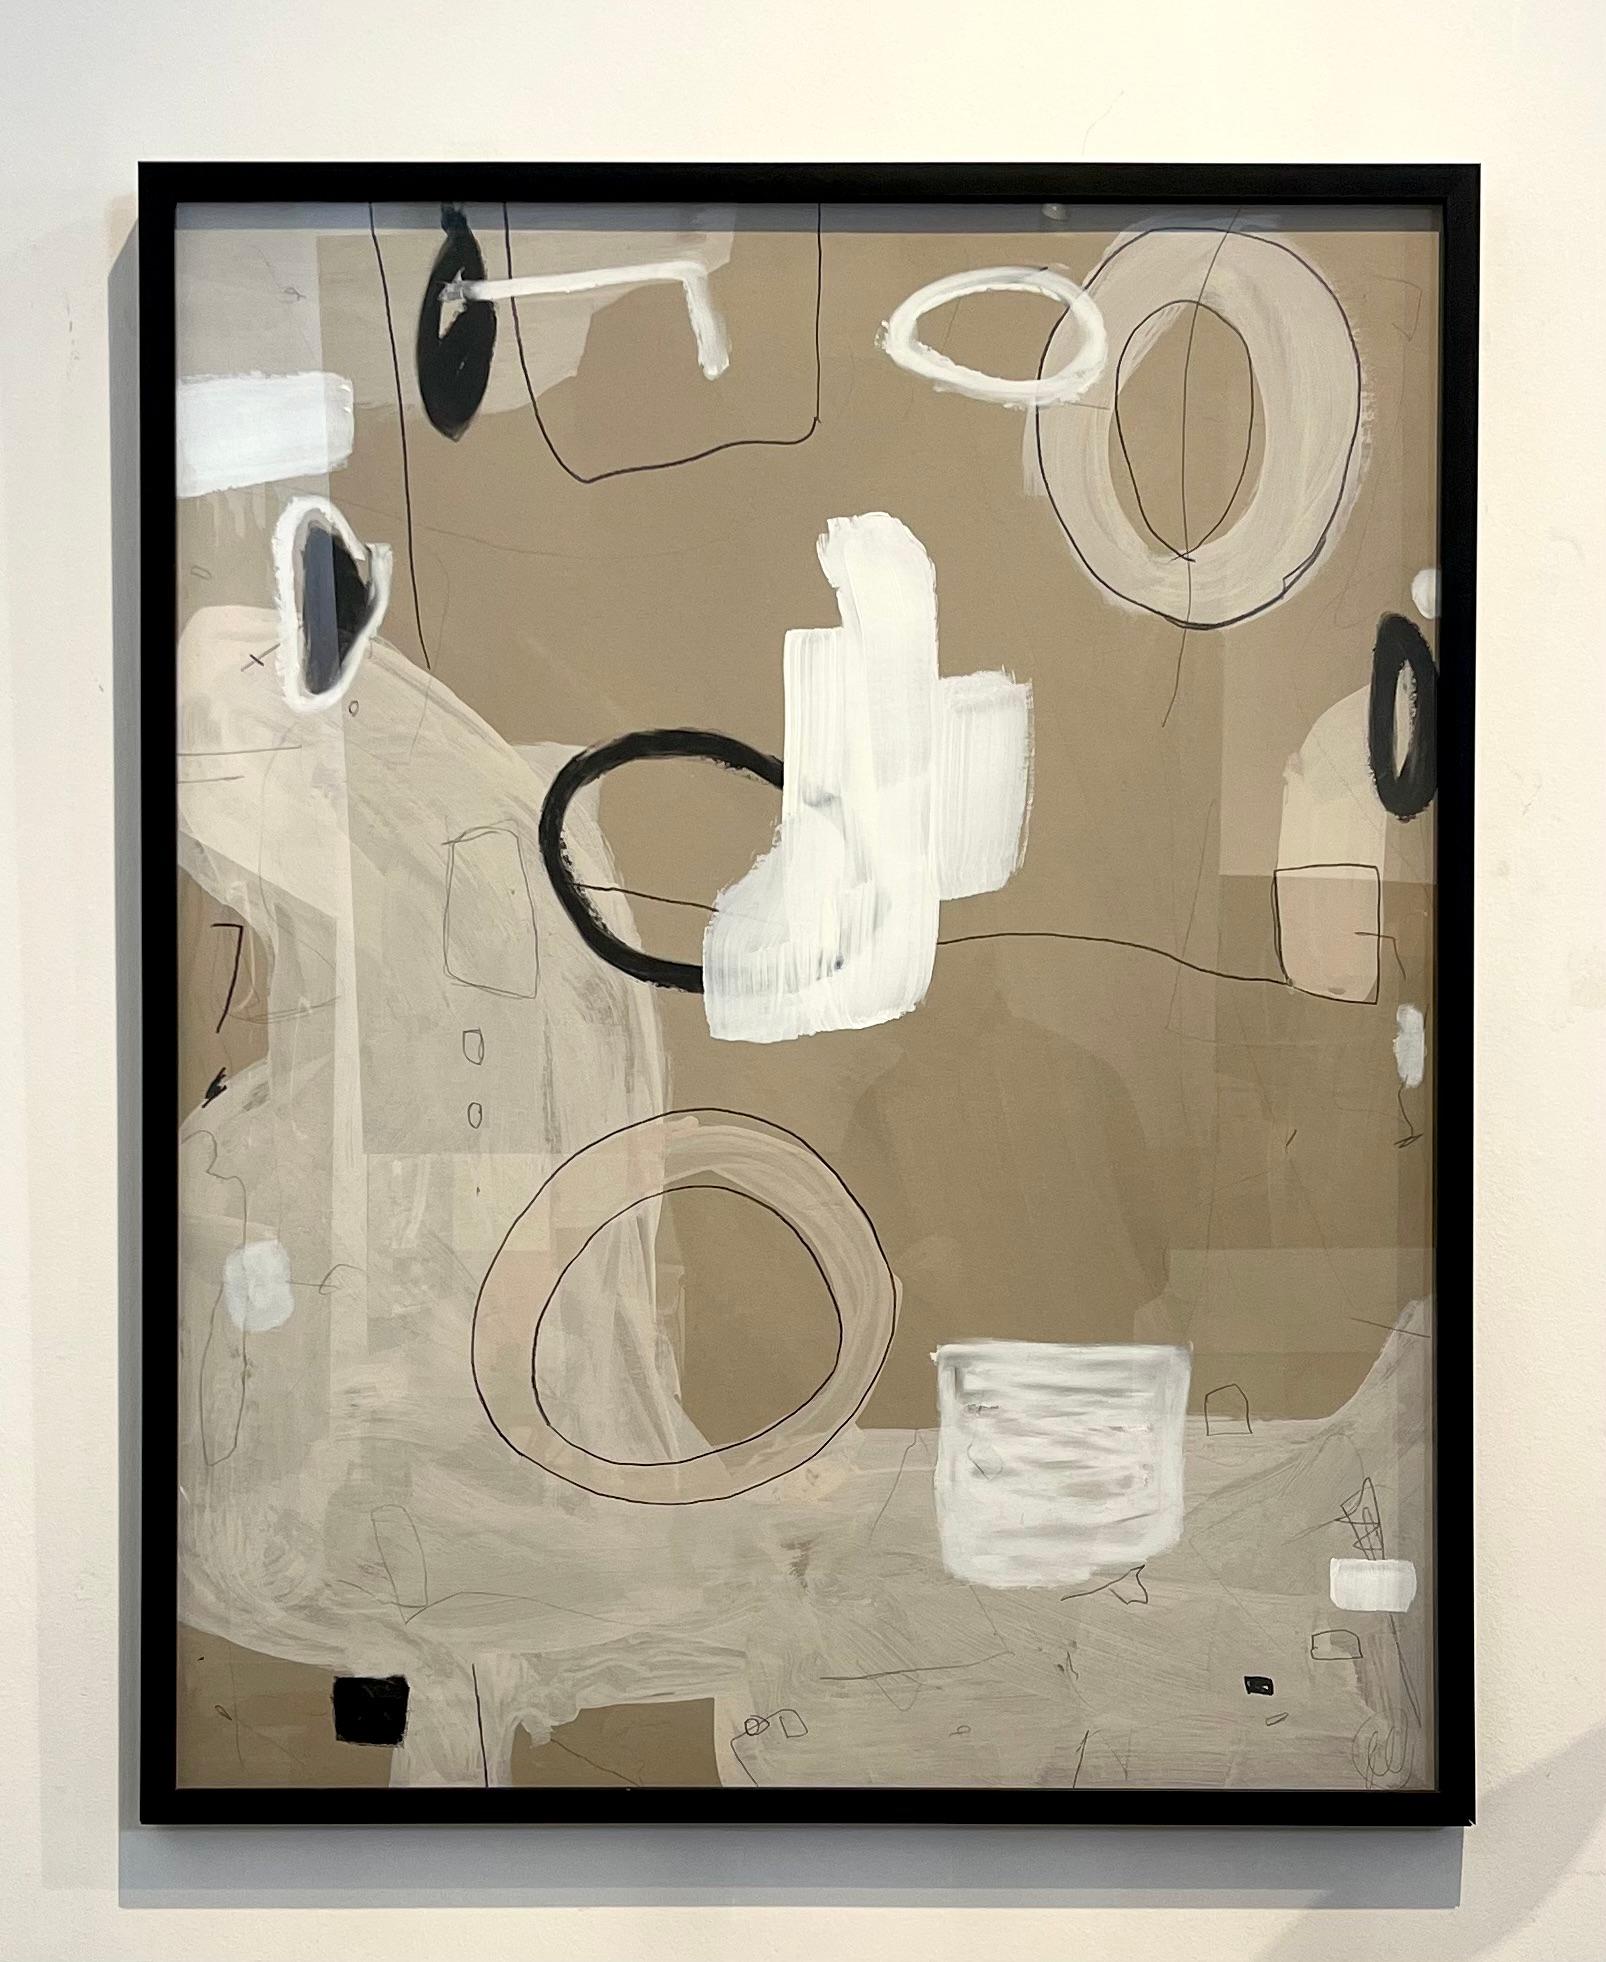 Untitled #135  by Murray Duncan
Mix media on paper
Framed, wood/glass

Murray Duncan, b. 1966, is a self taught creator. He is one of the founders and the creative director for Morgan Clayhall, a furniture line represented in showrooms through out